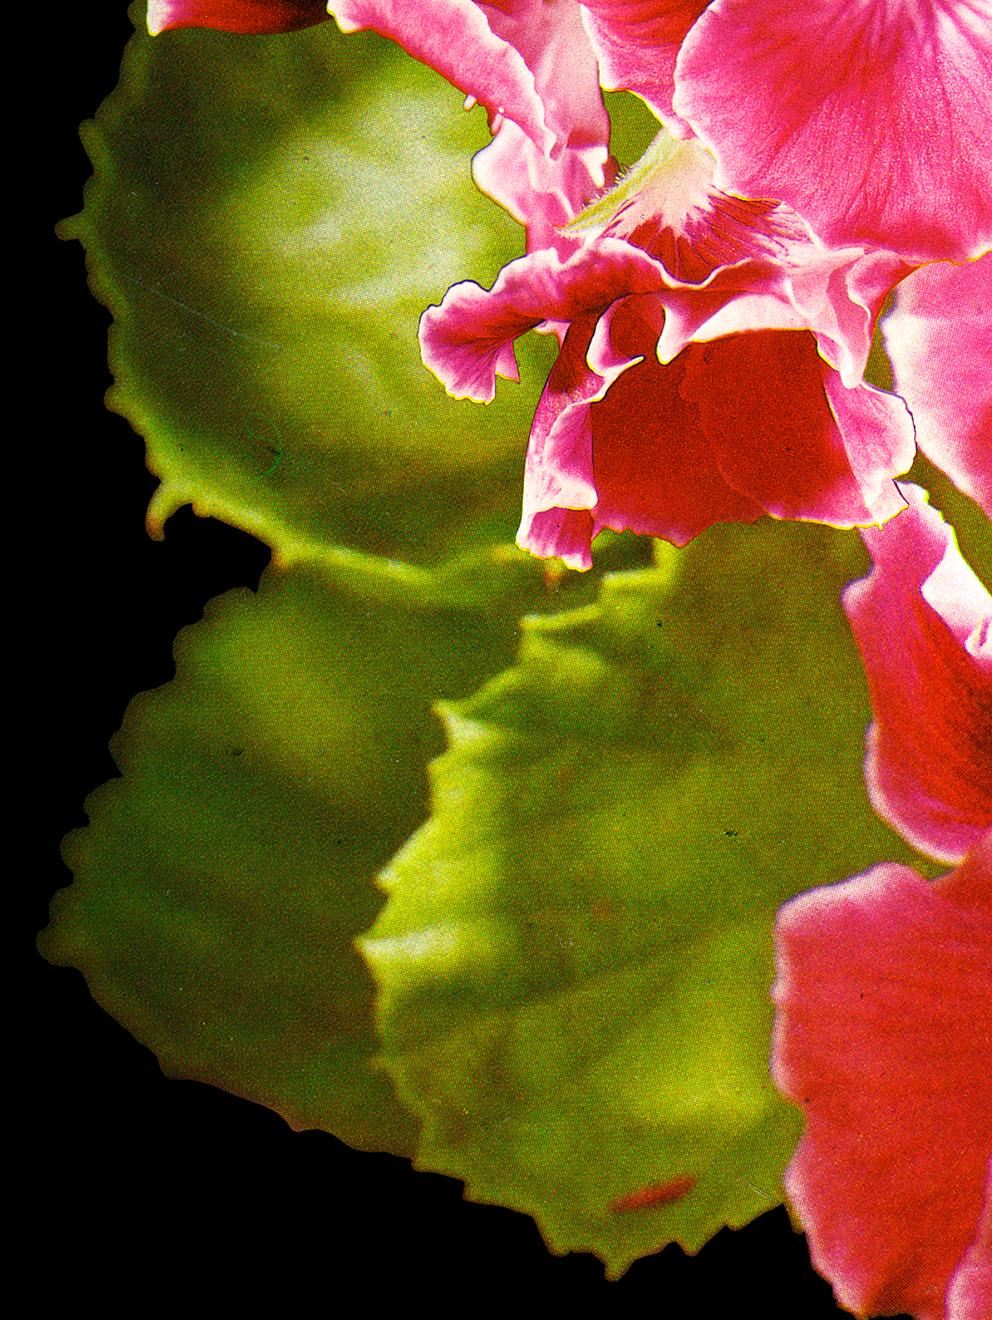 Big Pink (Black Background) - aerial photograph of vibrant flower (22 x 30) - Contemporary Print by Laura Kay Keeling 